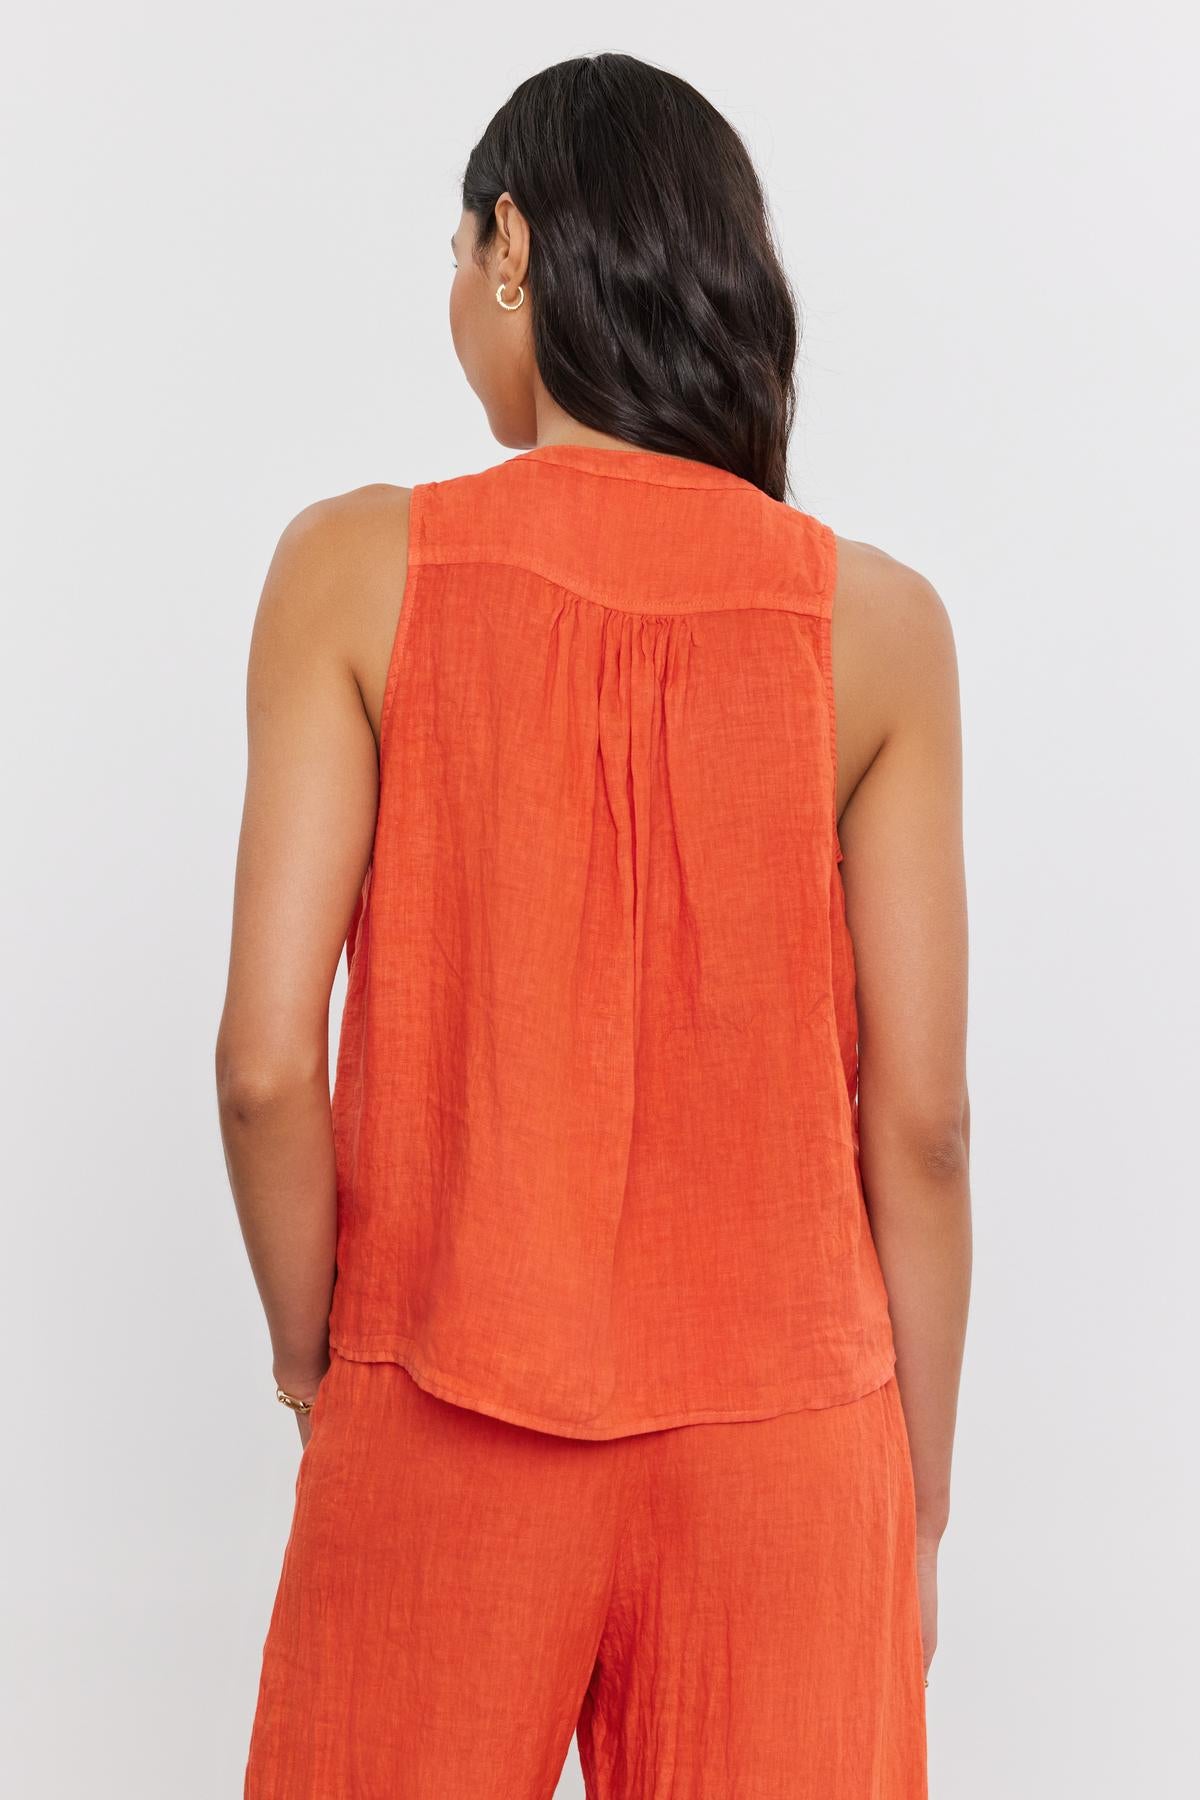 Woman with dark hair wearing a Velvet by Graham & Spencer Tacy Linen Tank Top, viewed from the back.-36909998506177